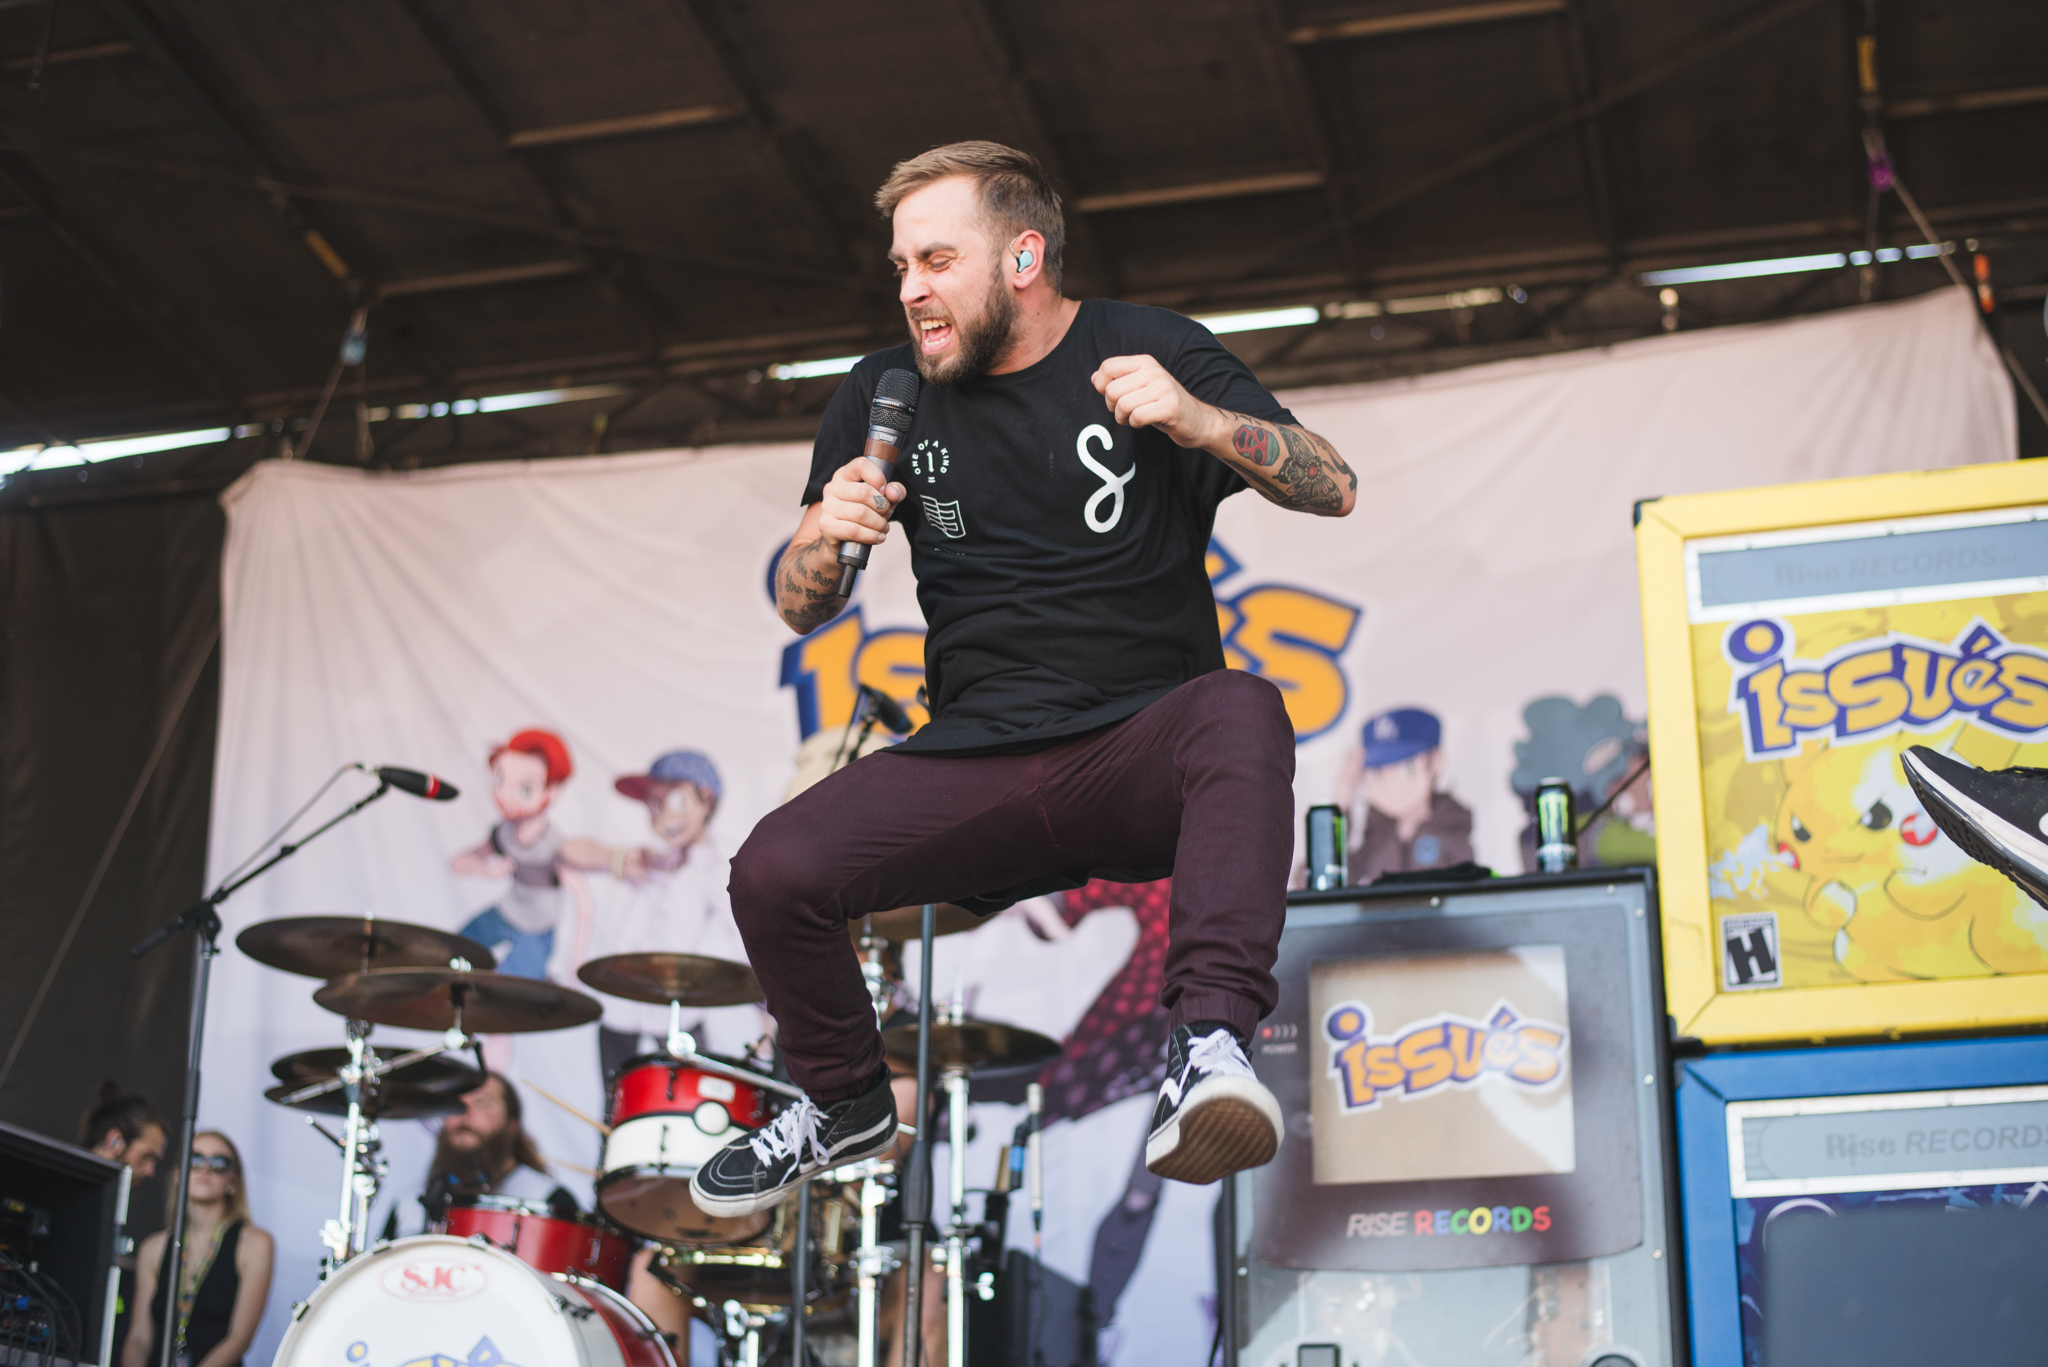 Issues - Photo by Lindsey Blane